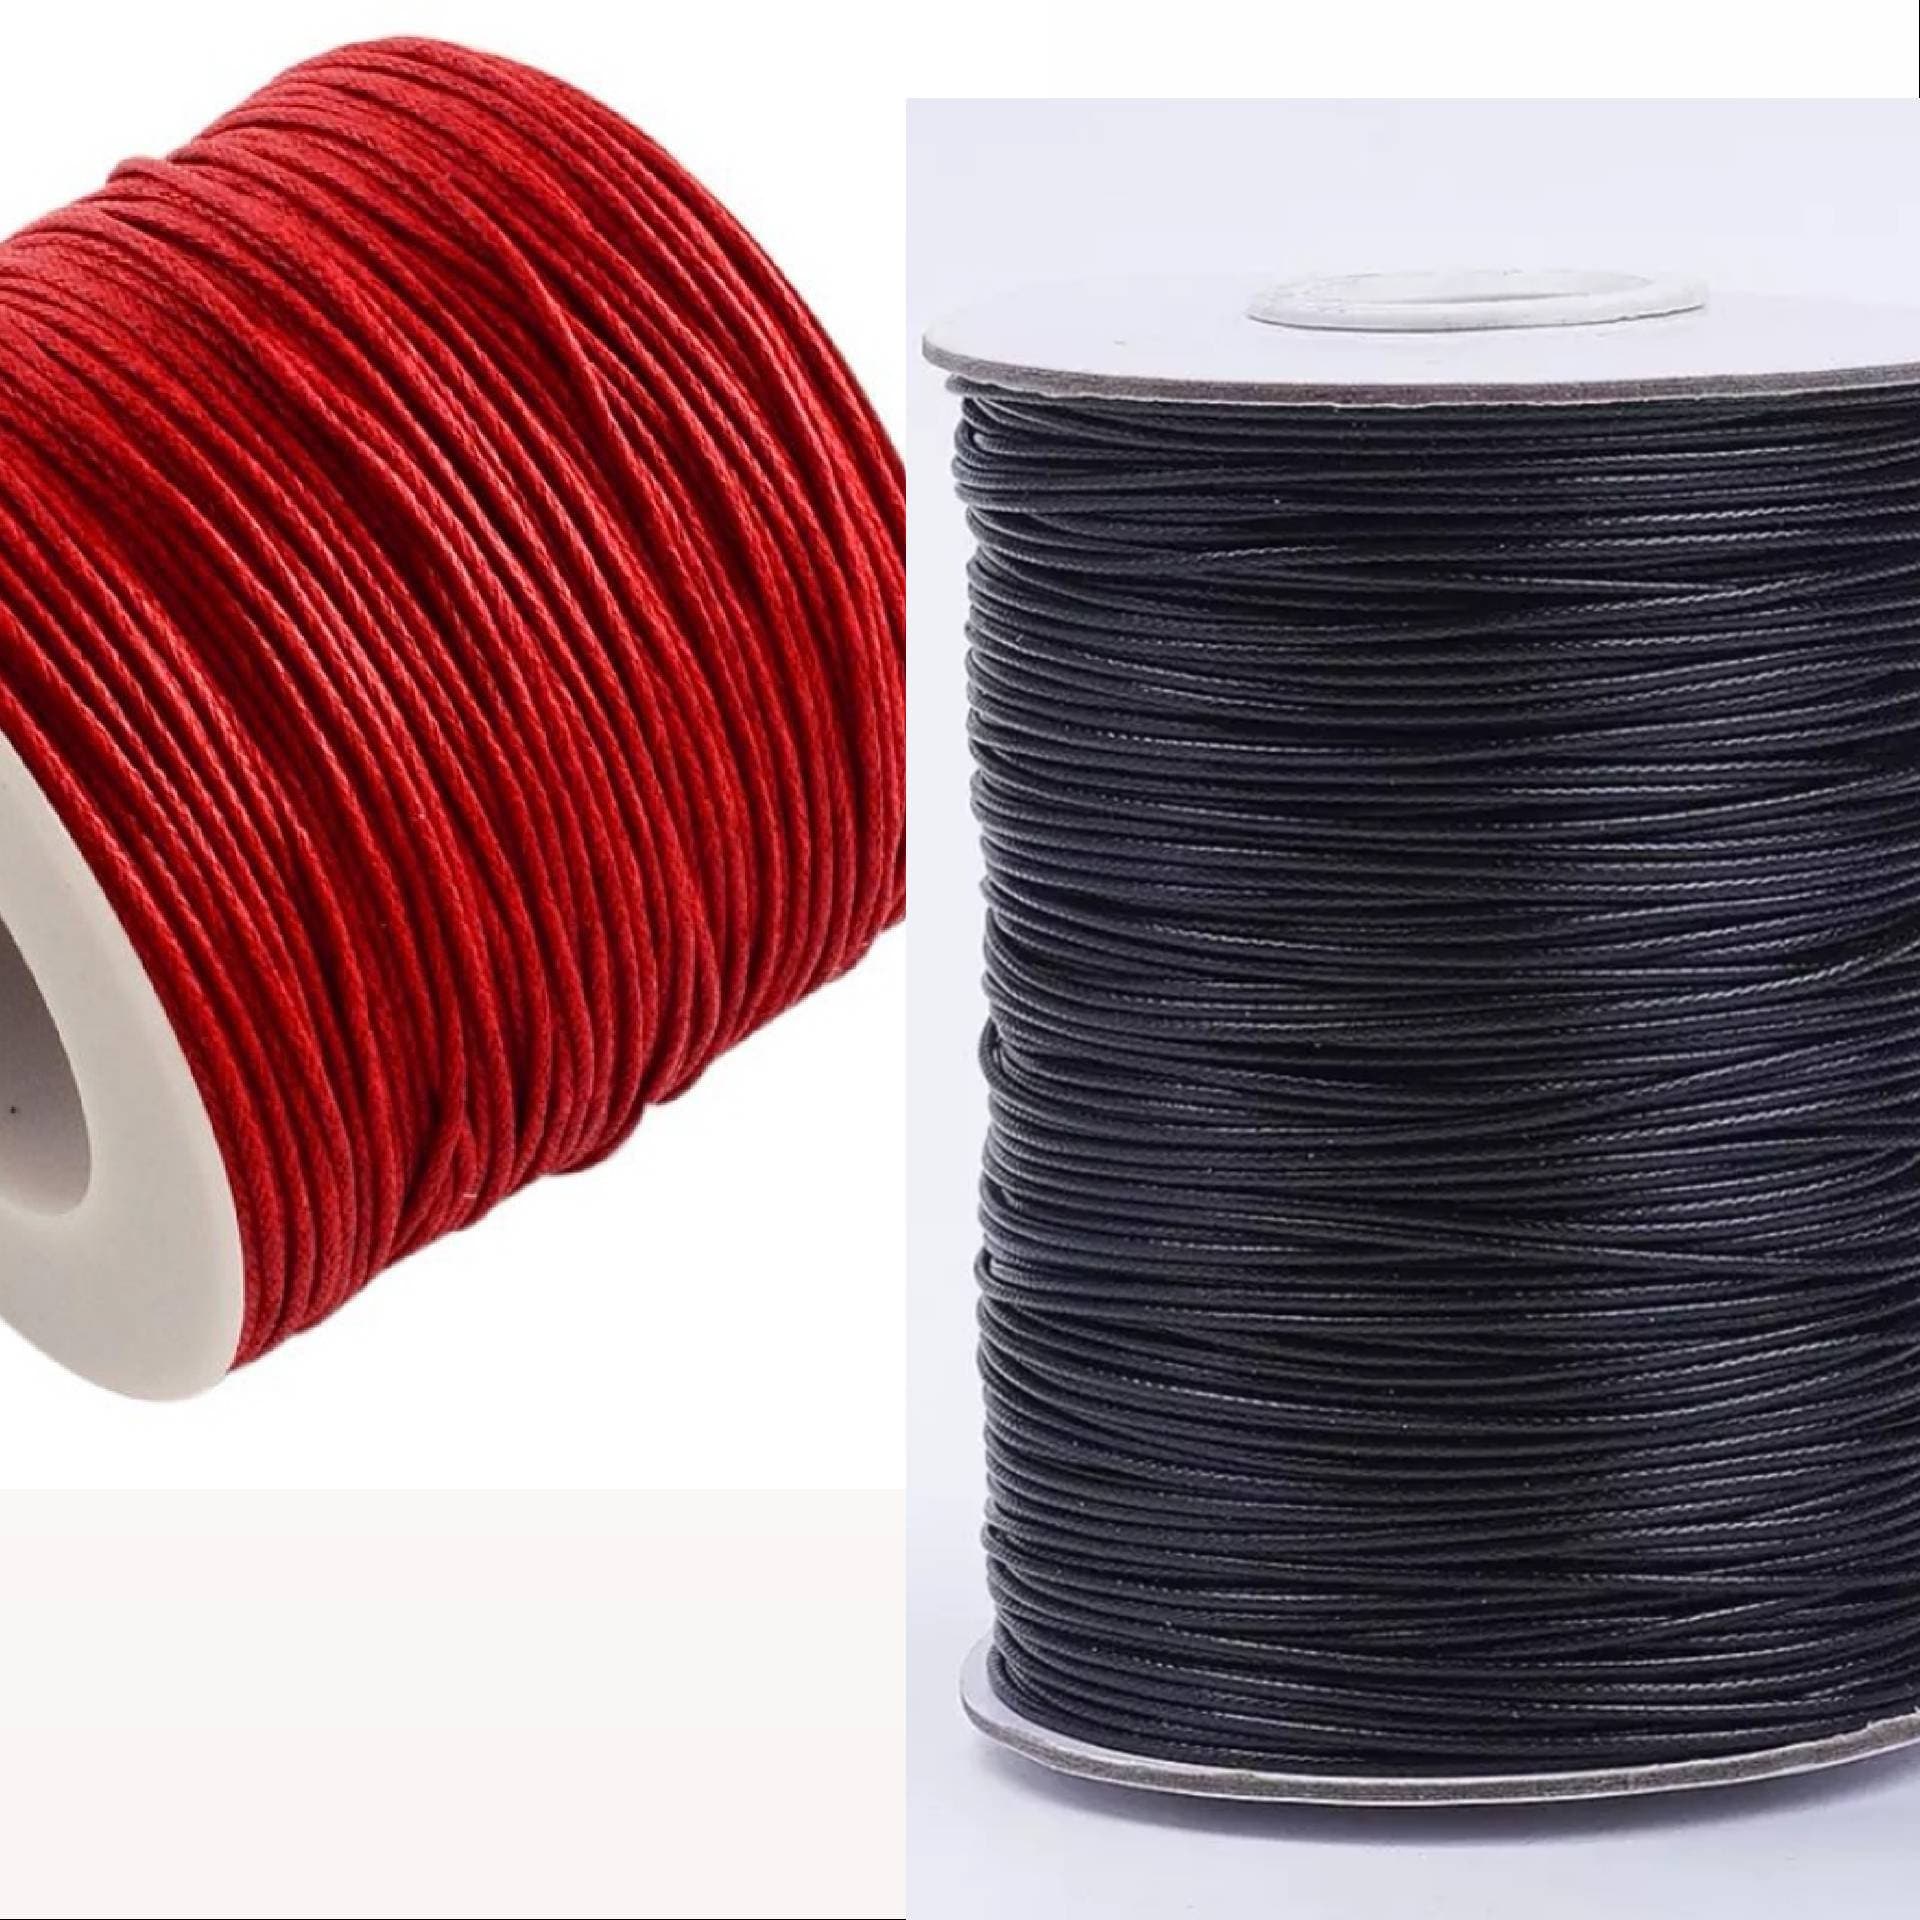 Red SILK Cord, Wrapped Silk Satin Cord Rope 1.5 Mm Thick, Organic